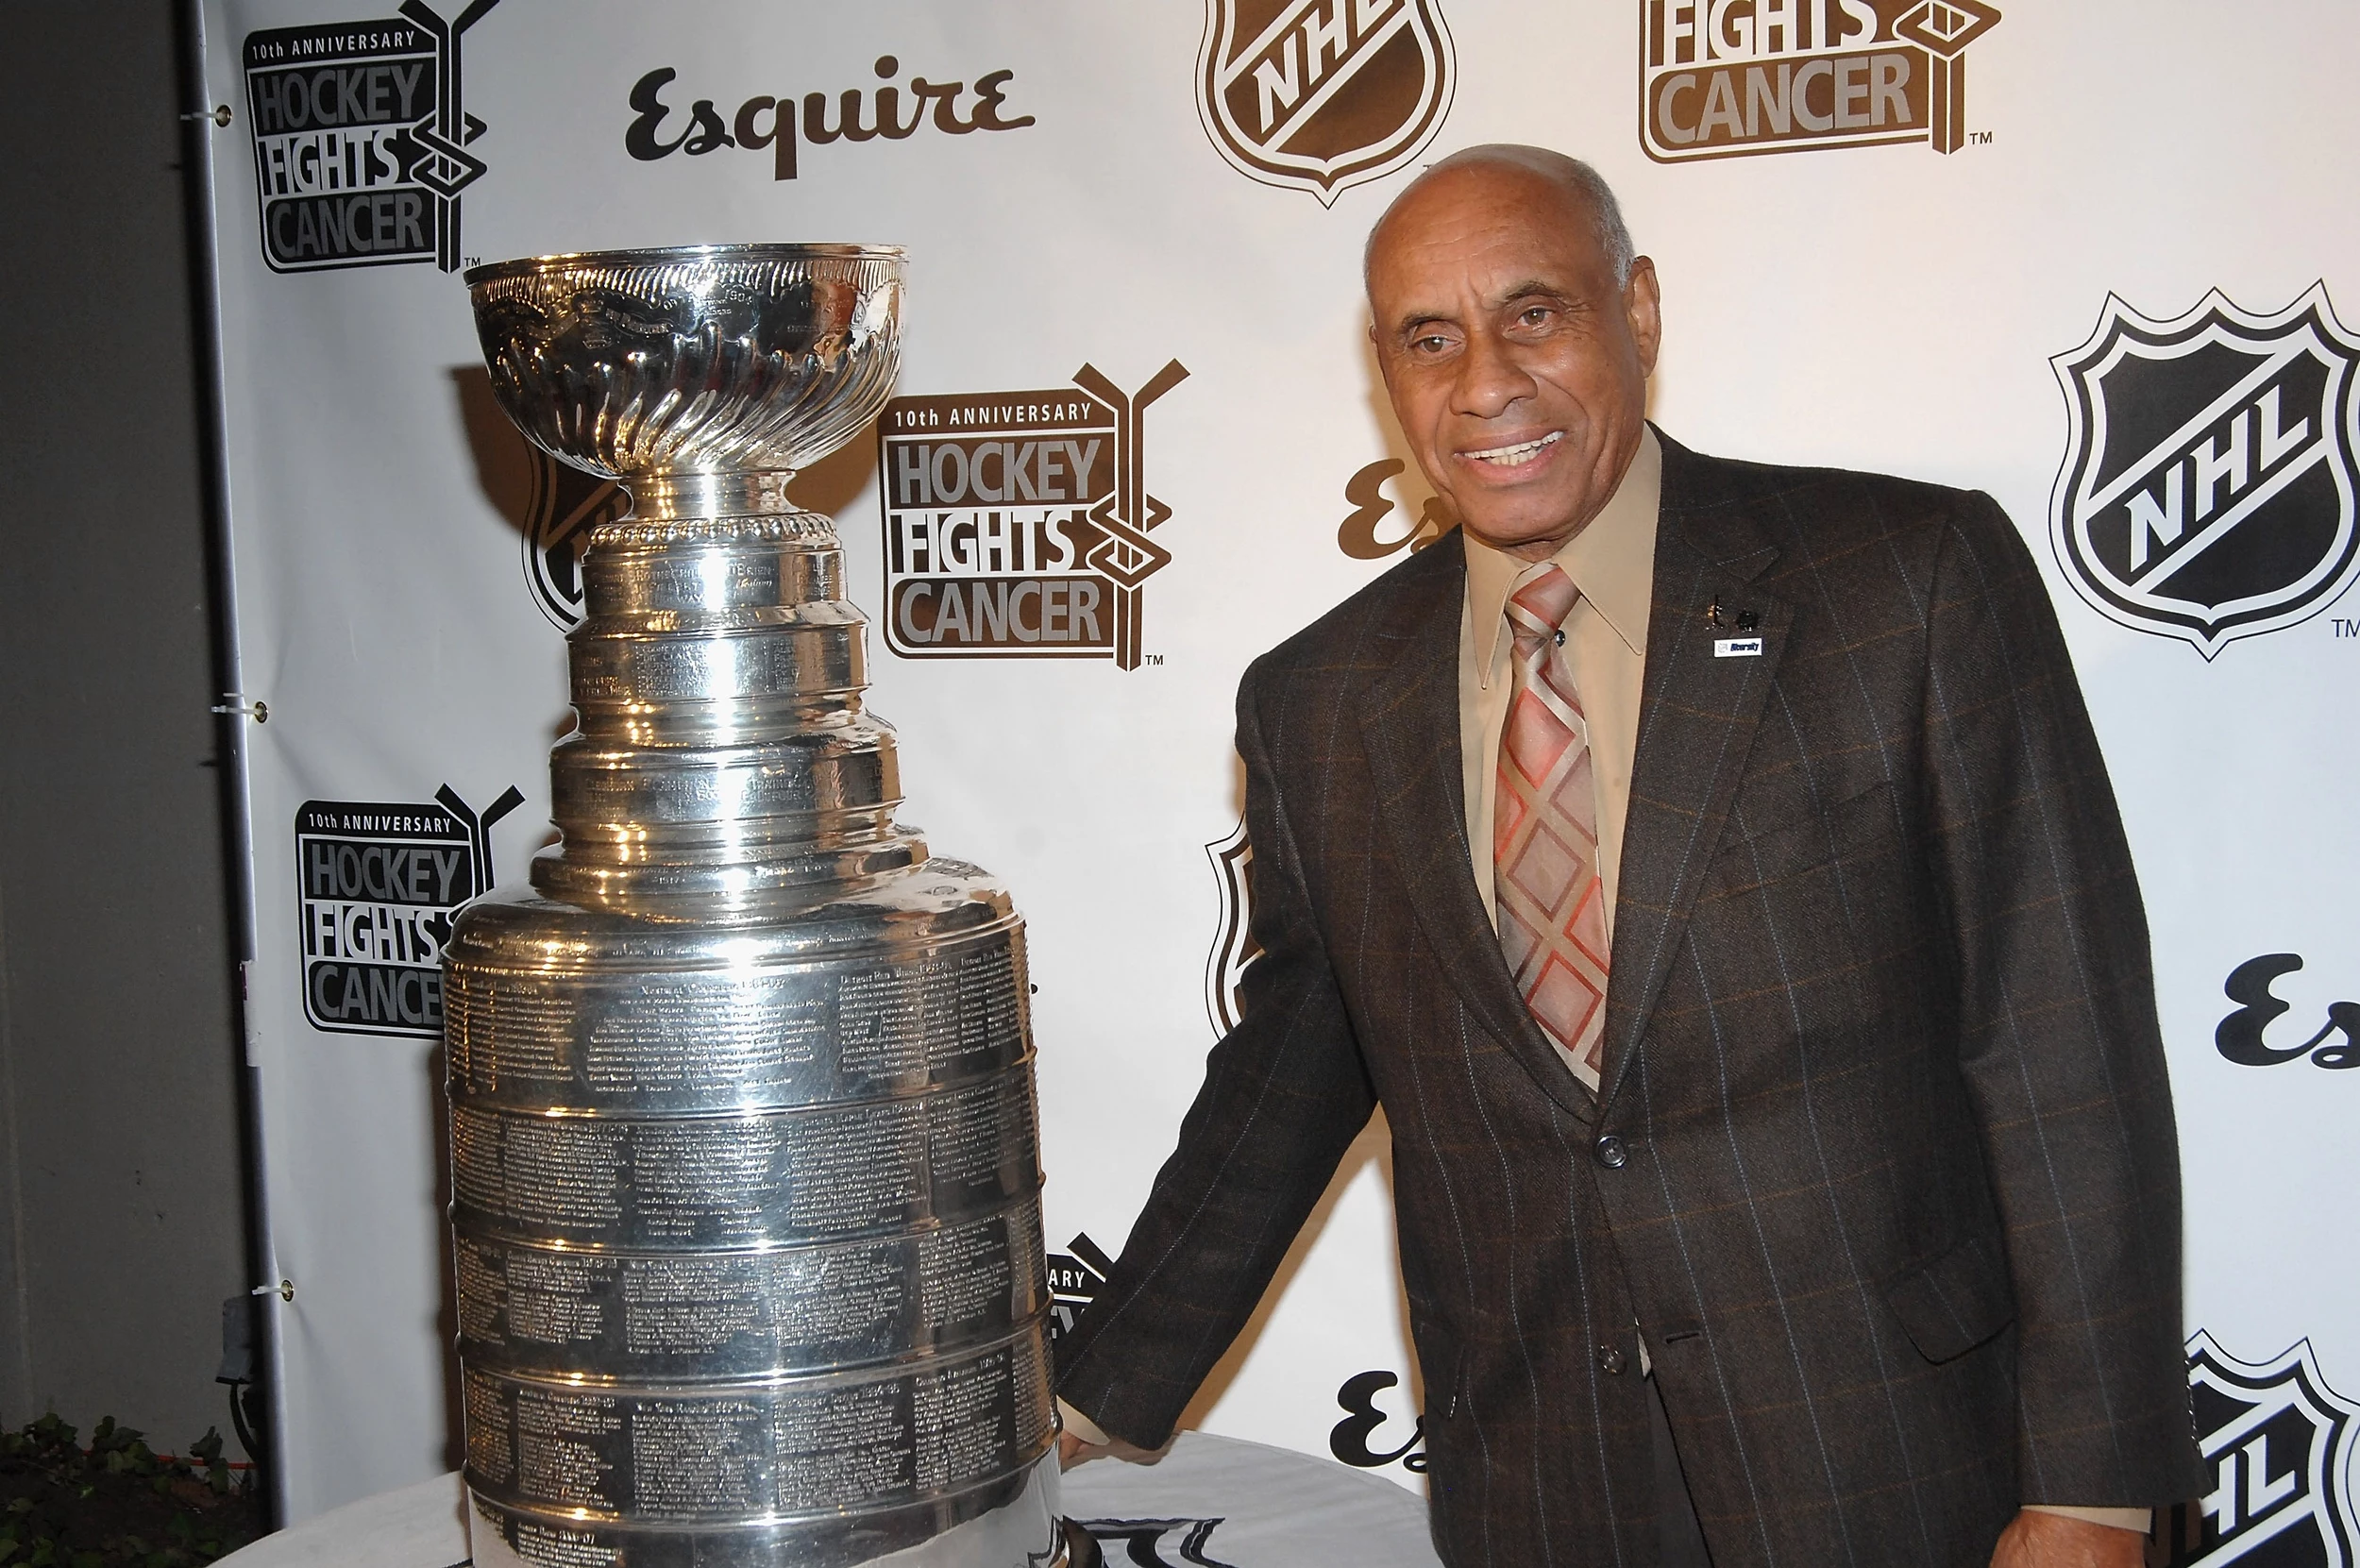 Be the best individual you can be': Willie O'Ree documentary is a